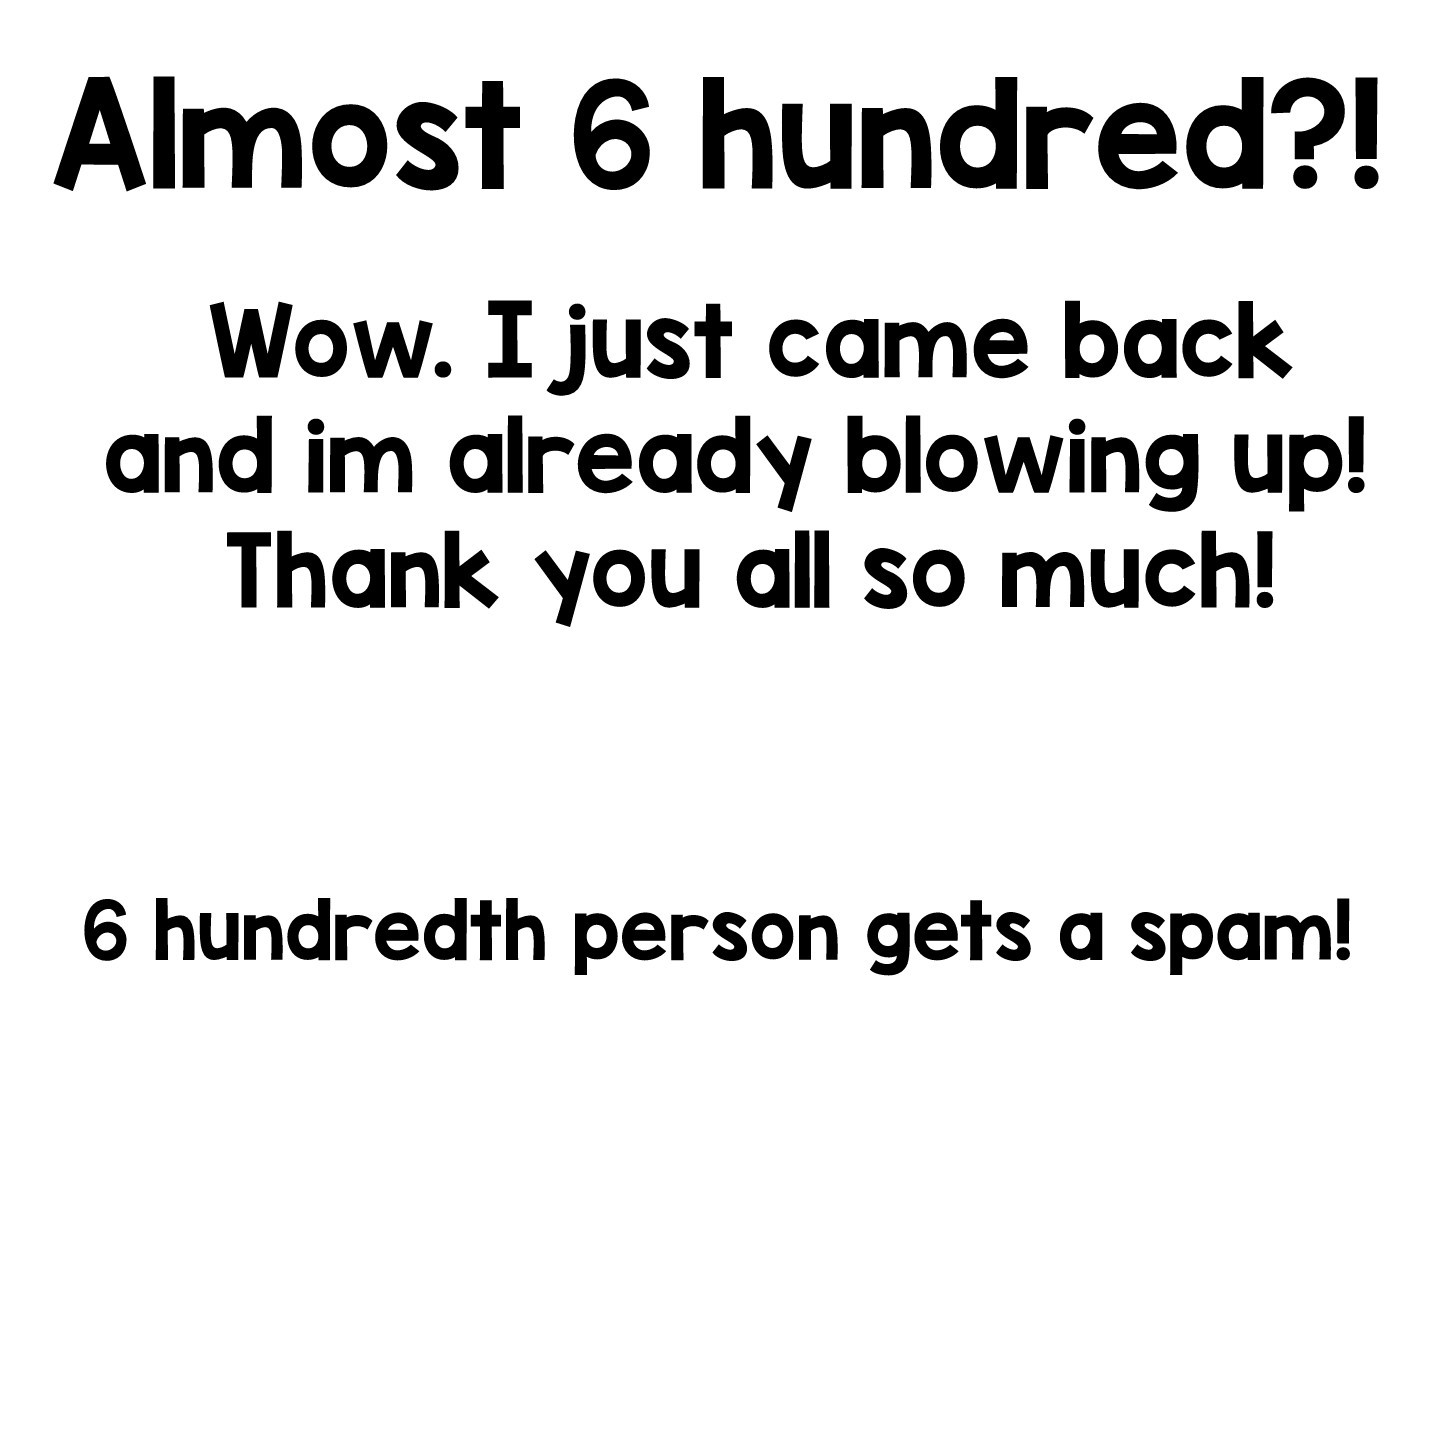 6 hundredth person gets a spam!